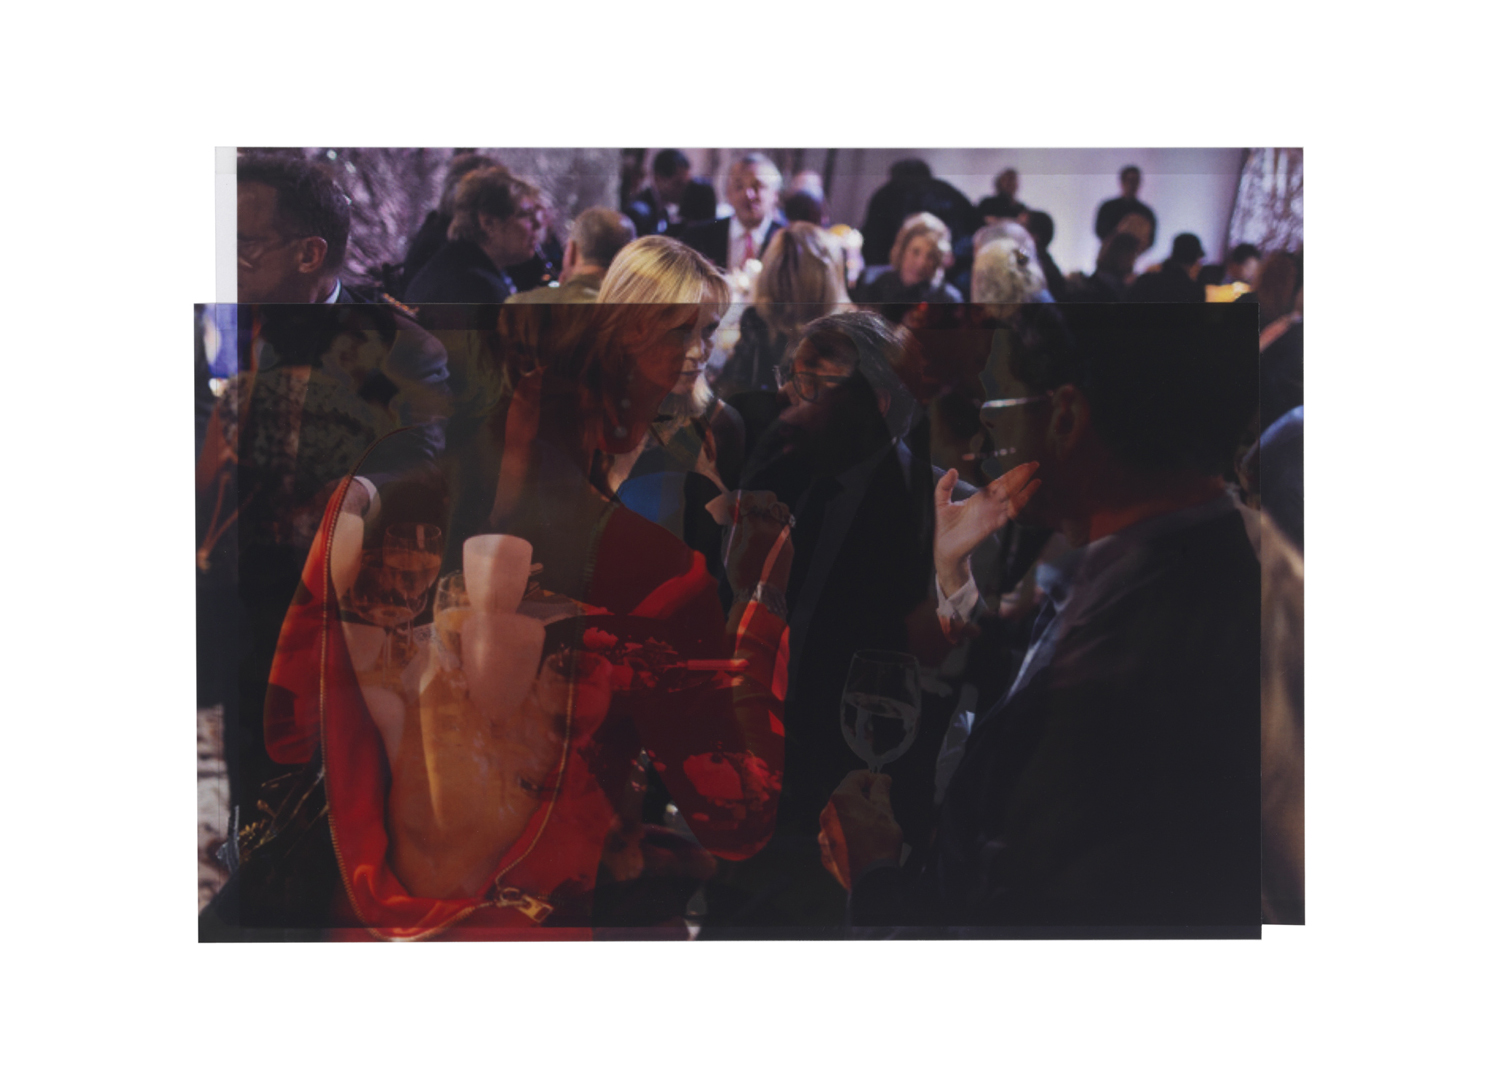   photographer unknown, 2012 (scene from Fashion Week, New York) / photographer unknown NYTs, April 2014 (Bob Colacello with Lise Evans at Whitney Museum's American Art Award dinner)    8 x 11 1/8, 2 inkjet prints on mylar, constructed, one over the 